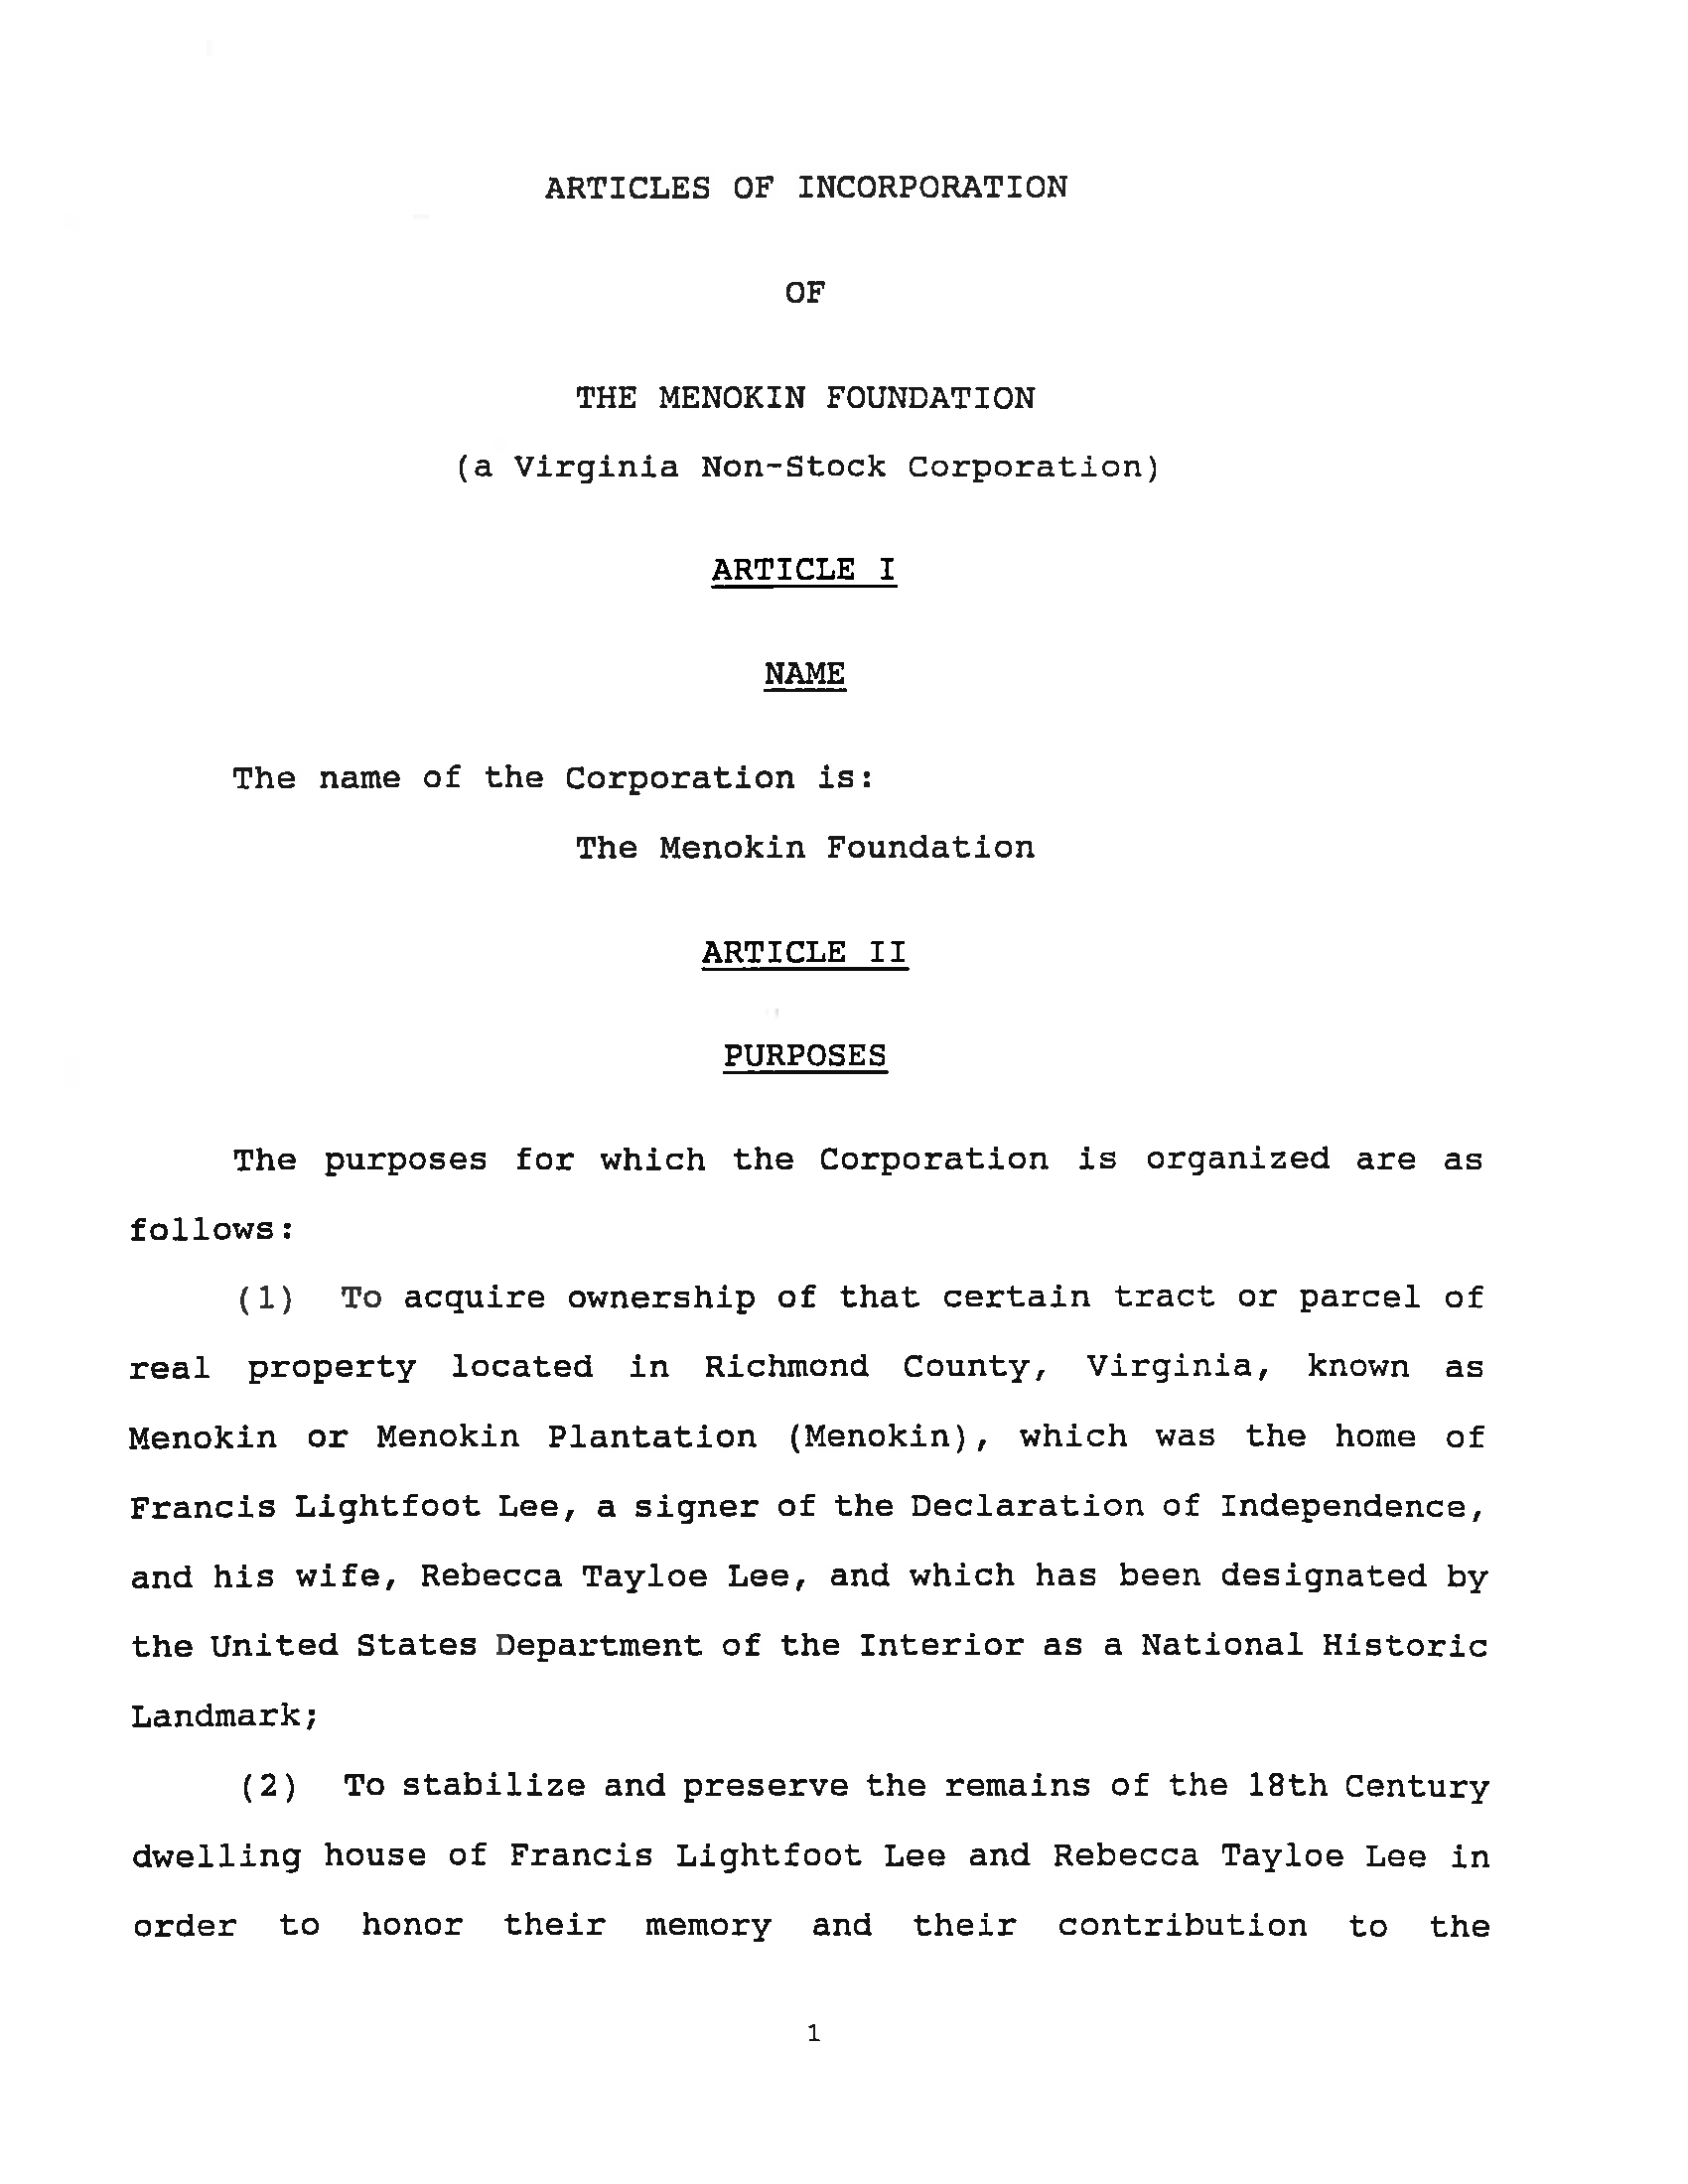 Menokin Foundation Articles of Incorporation_Page_03.png